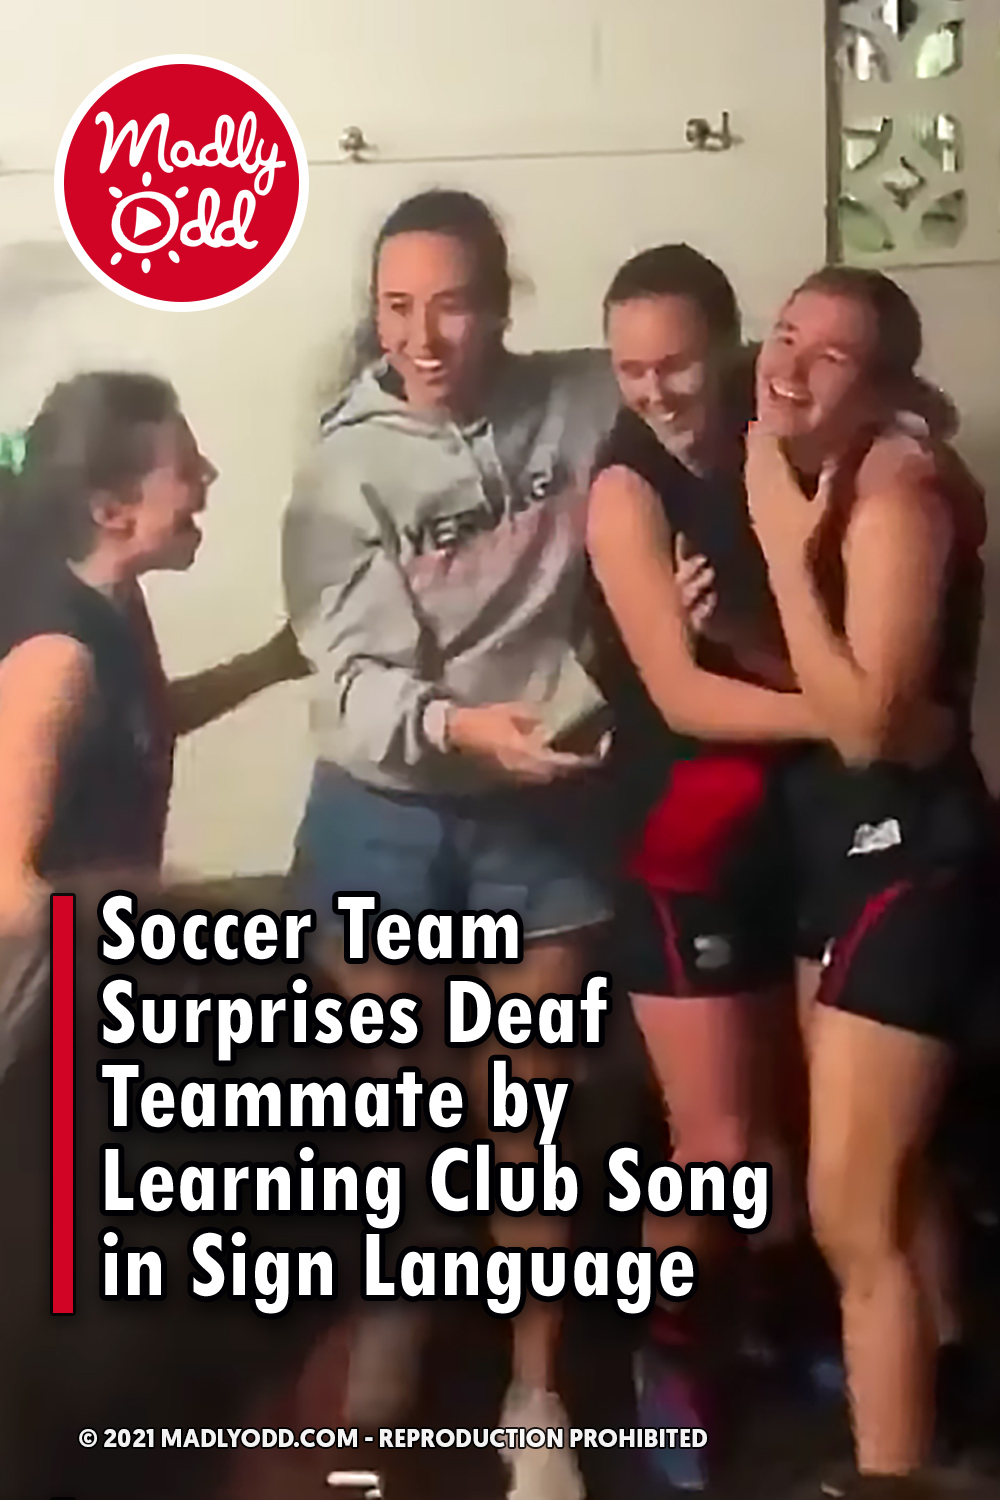 Soccer Team Surprises Deaf Teammate by Learning Club Song in Sign Language